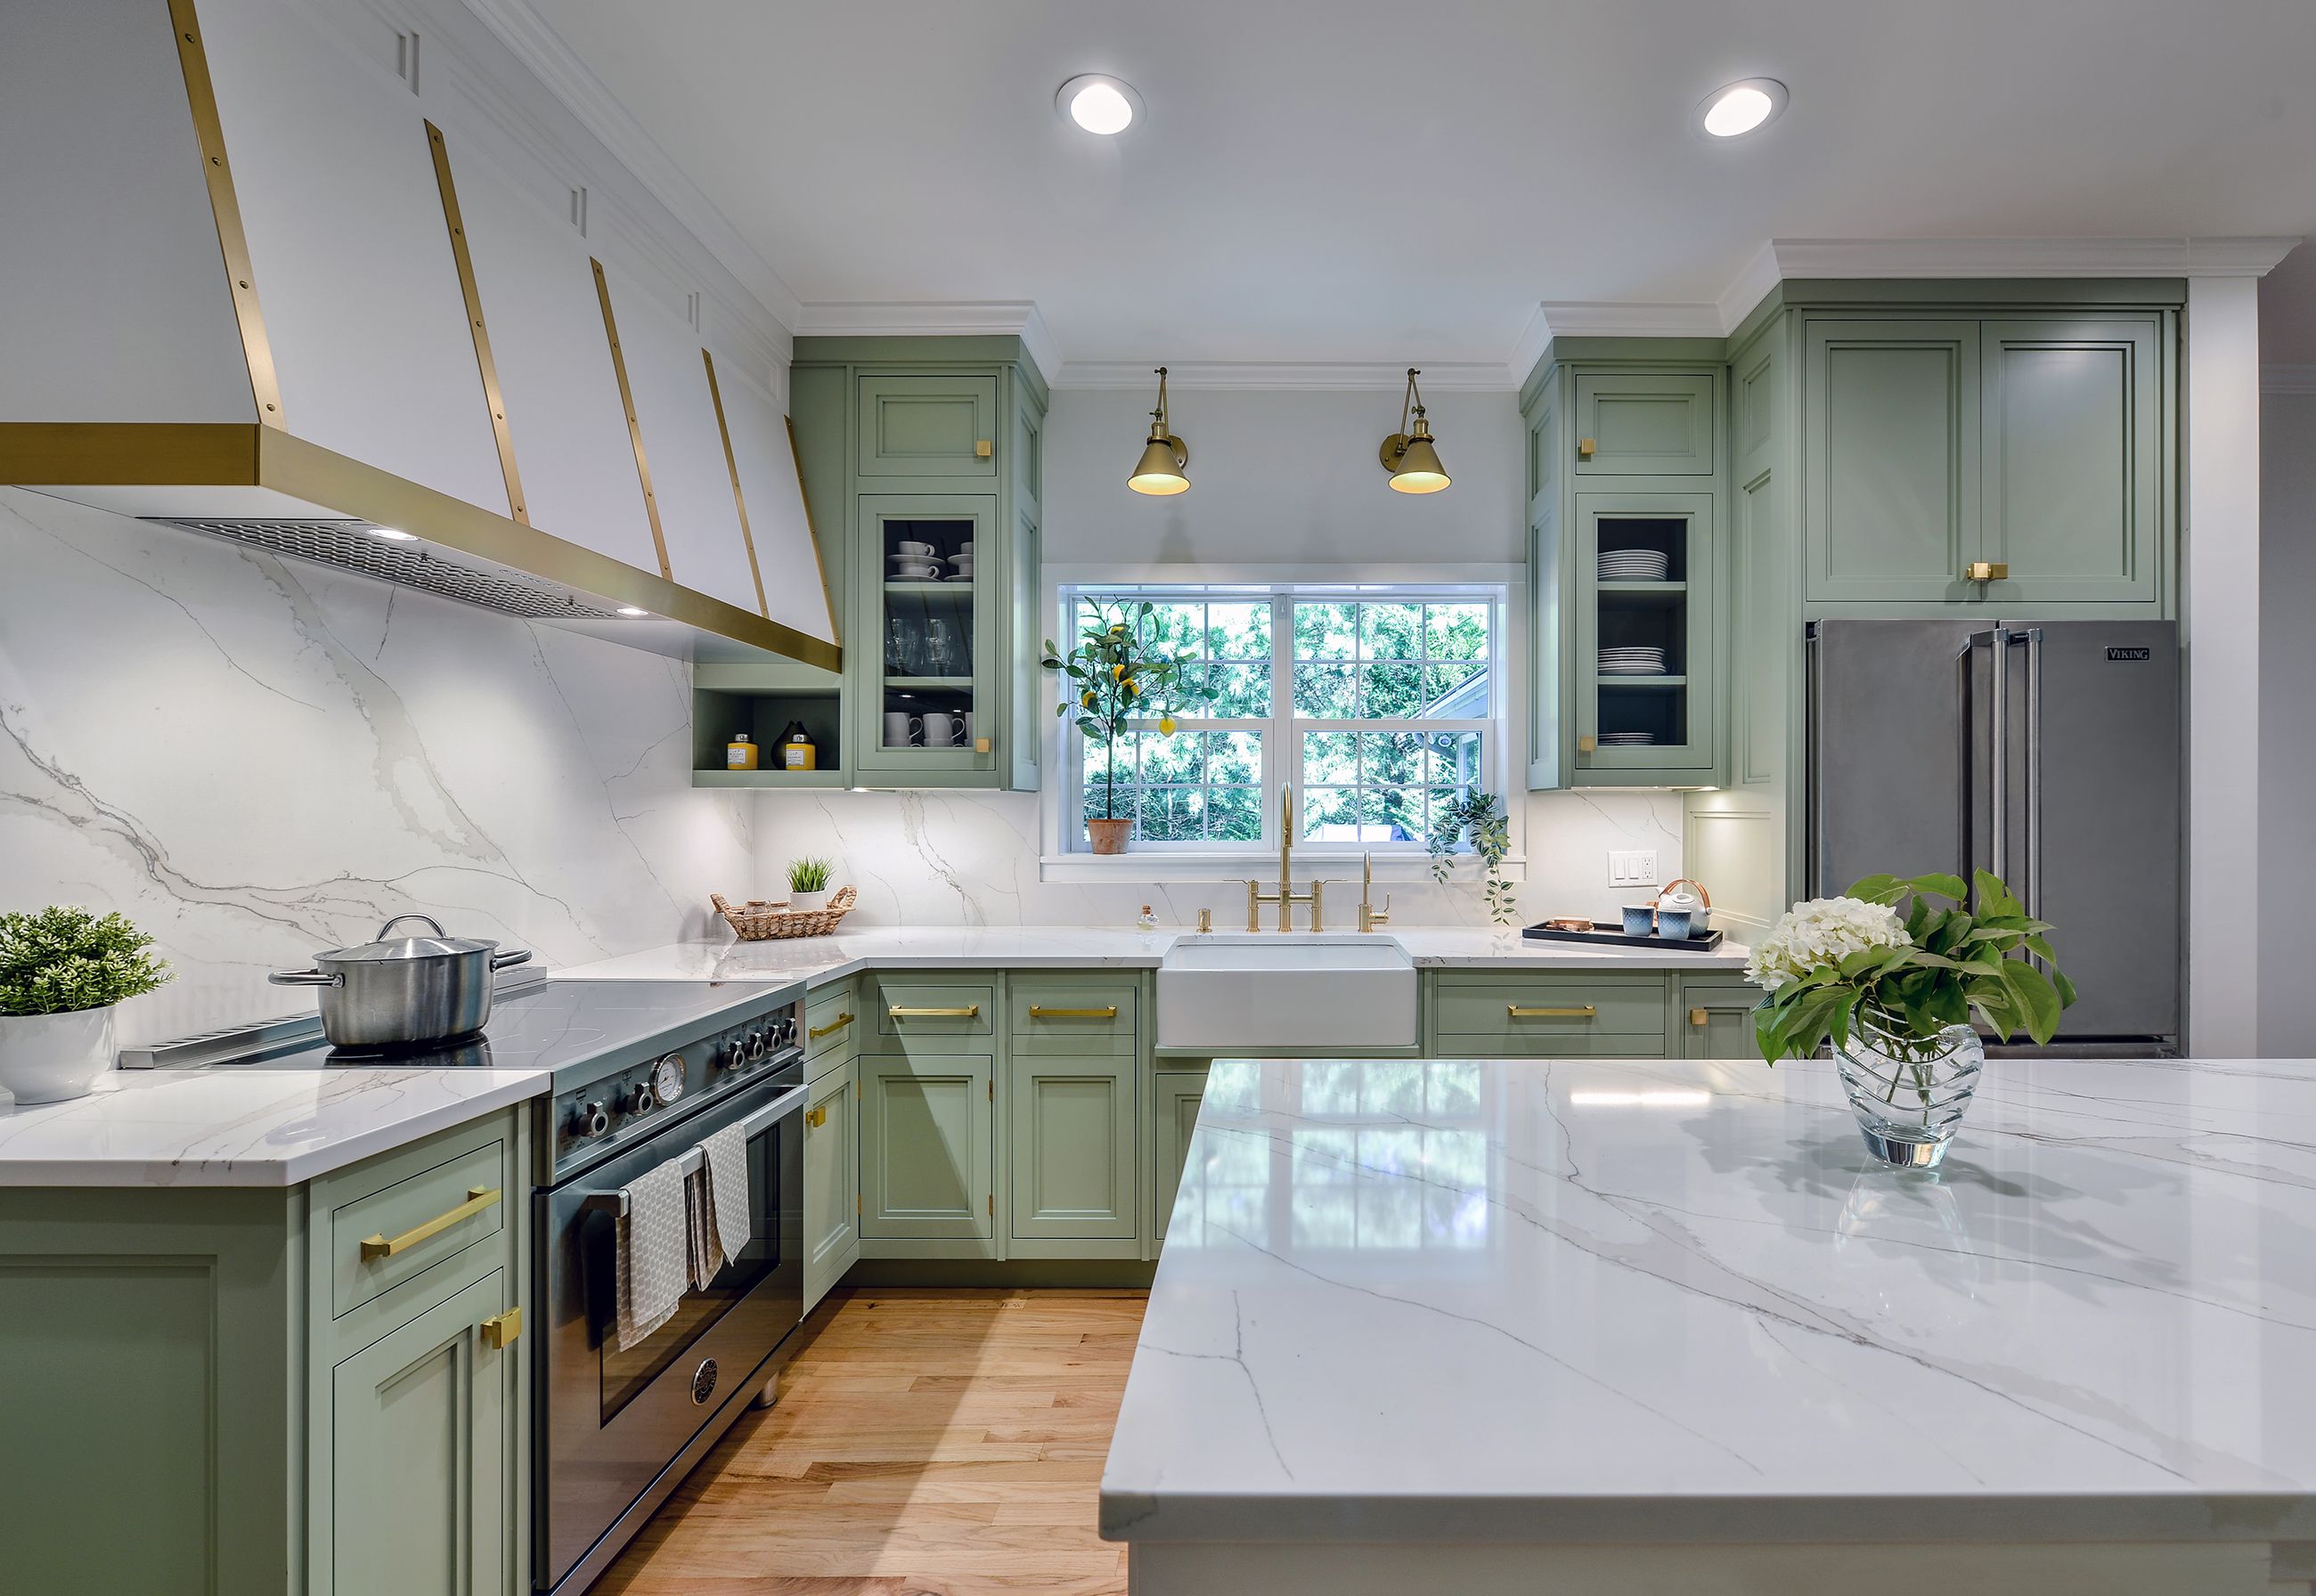 Kitchen and Bath Trends: The Color Sage